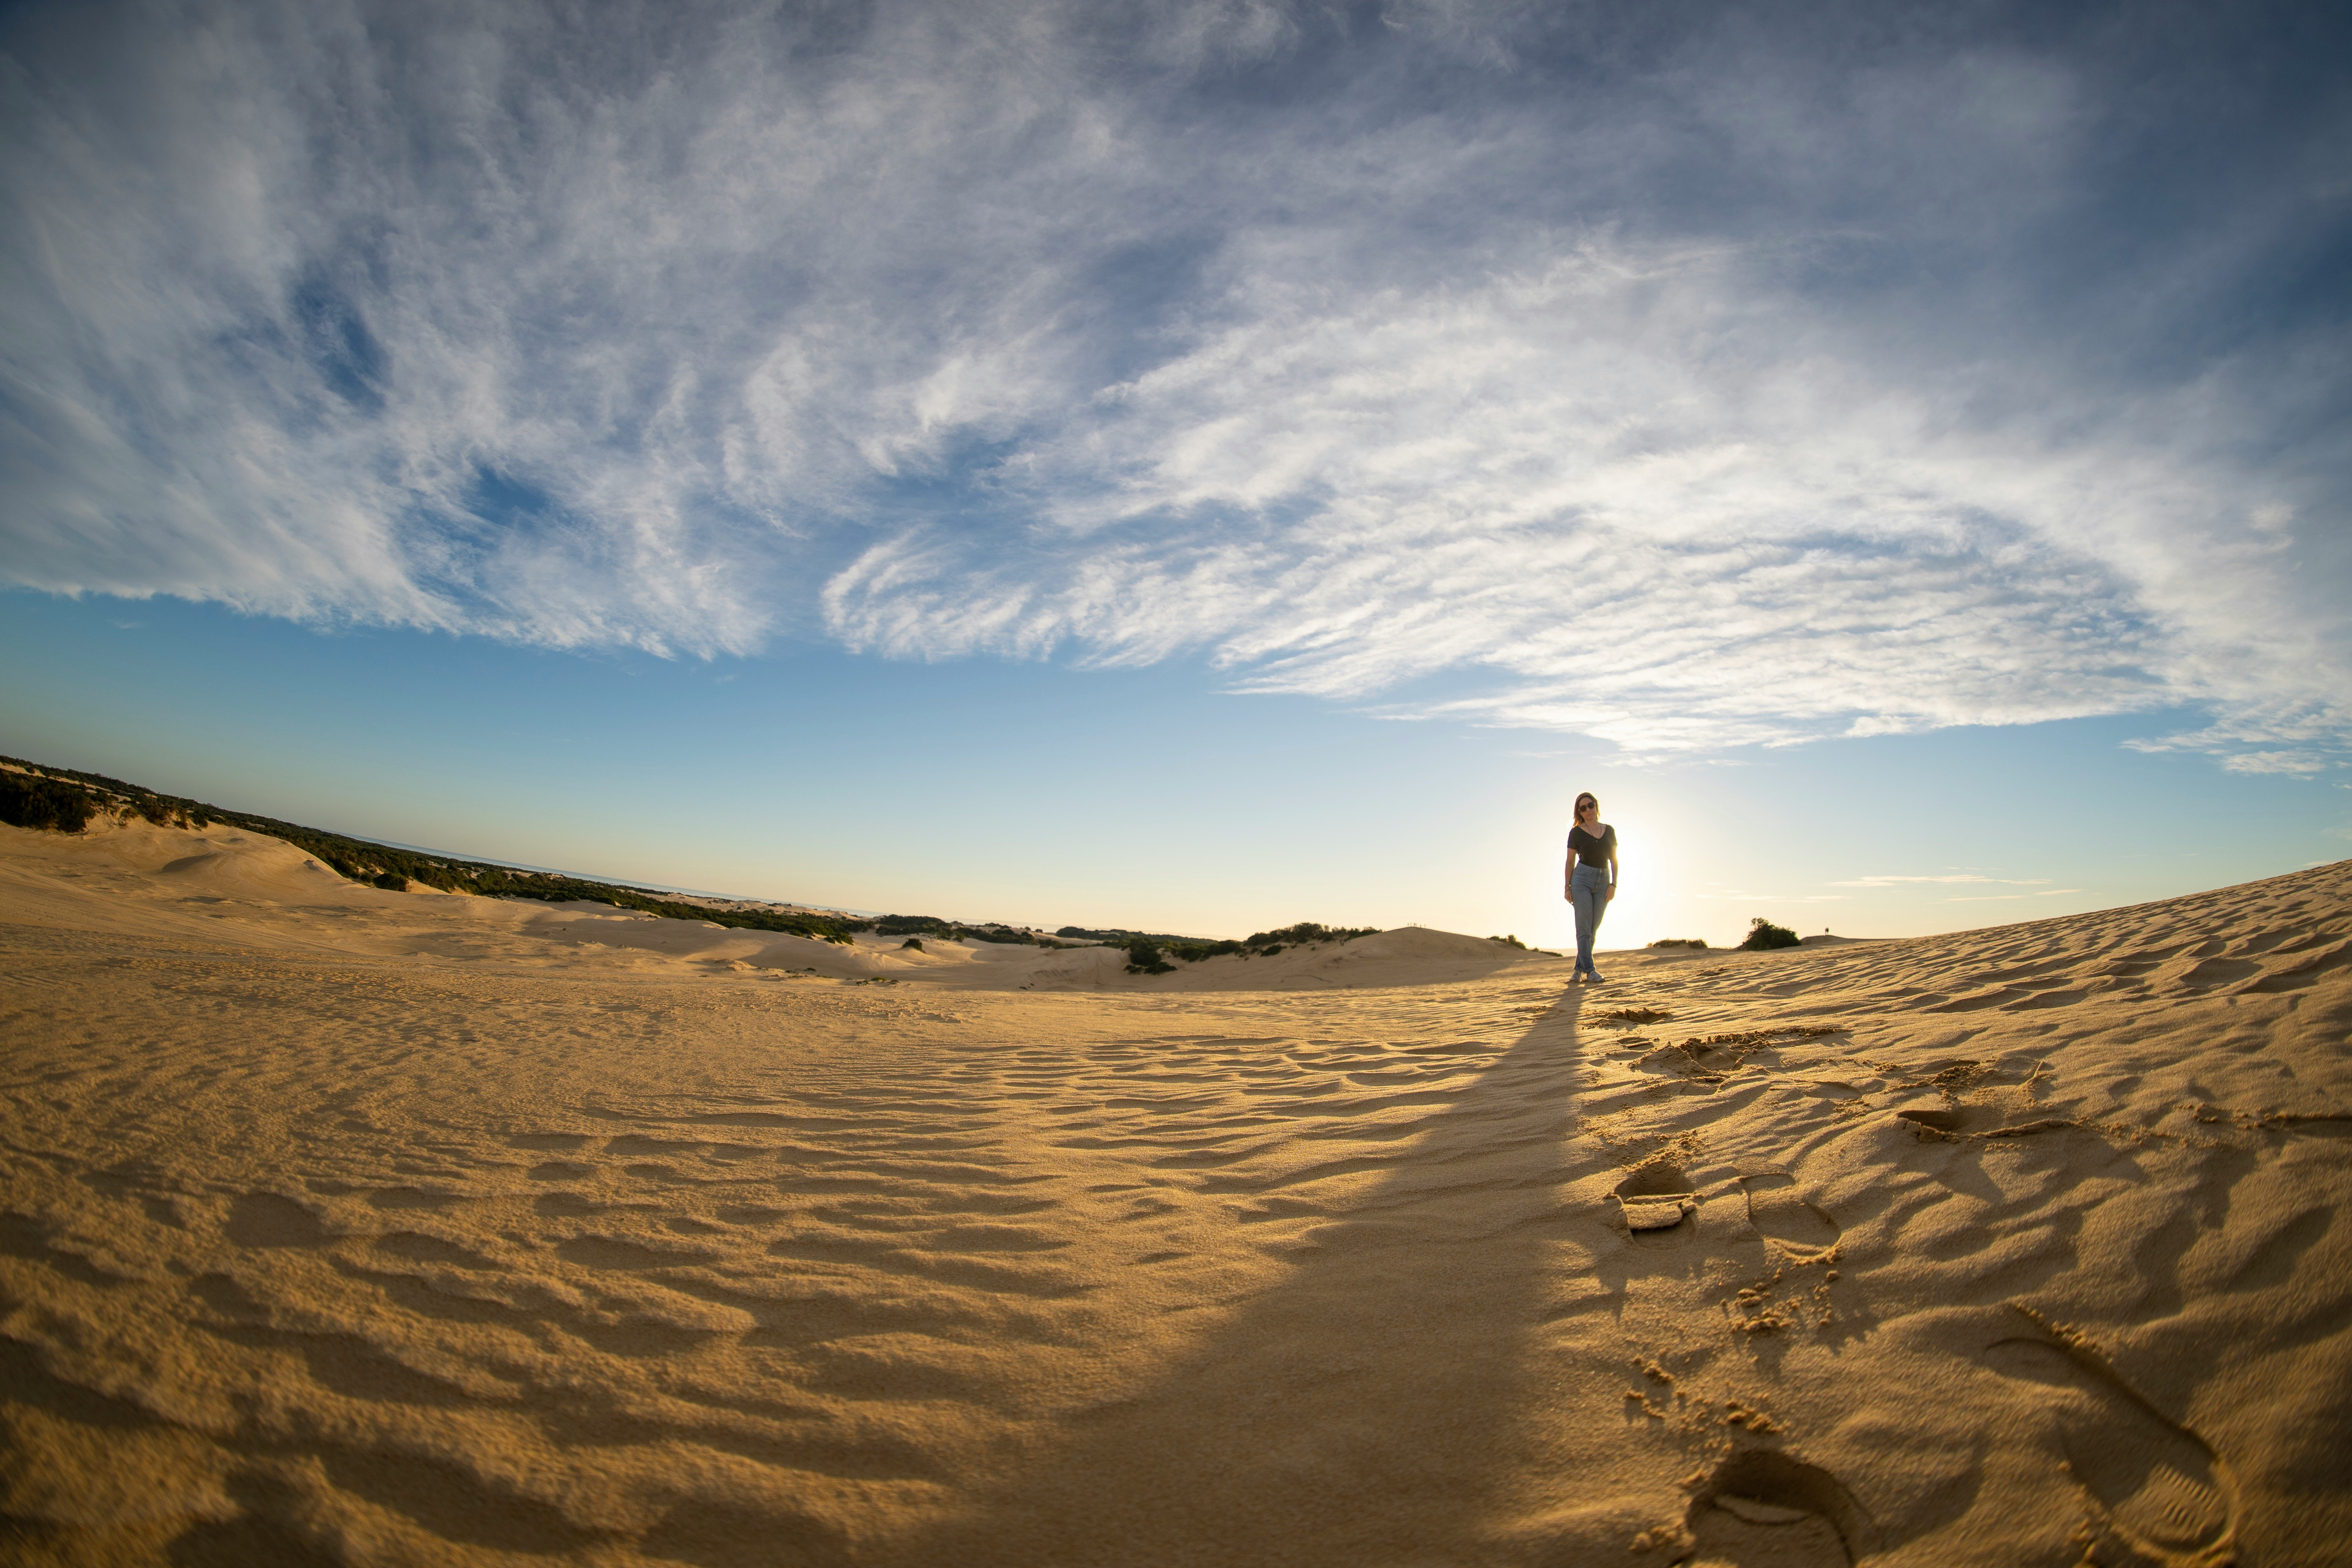 person standing on desert under blue and white skies